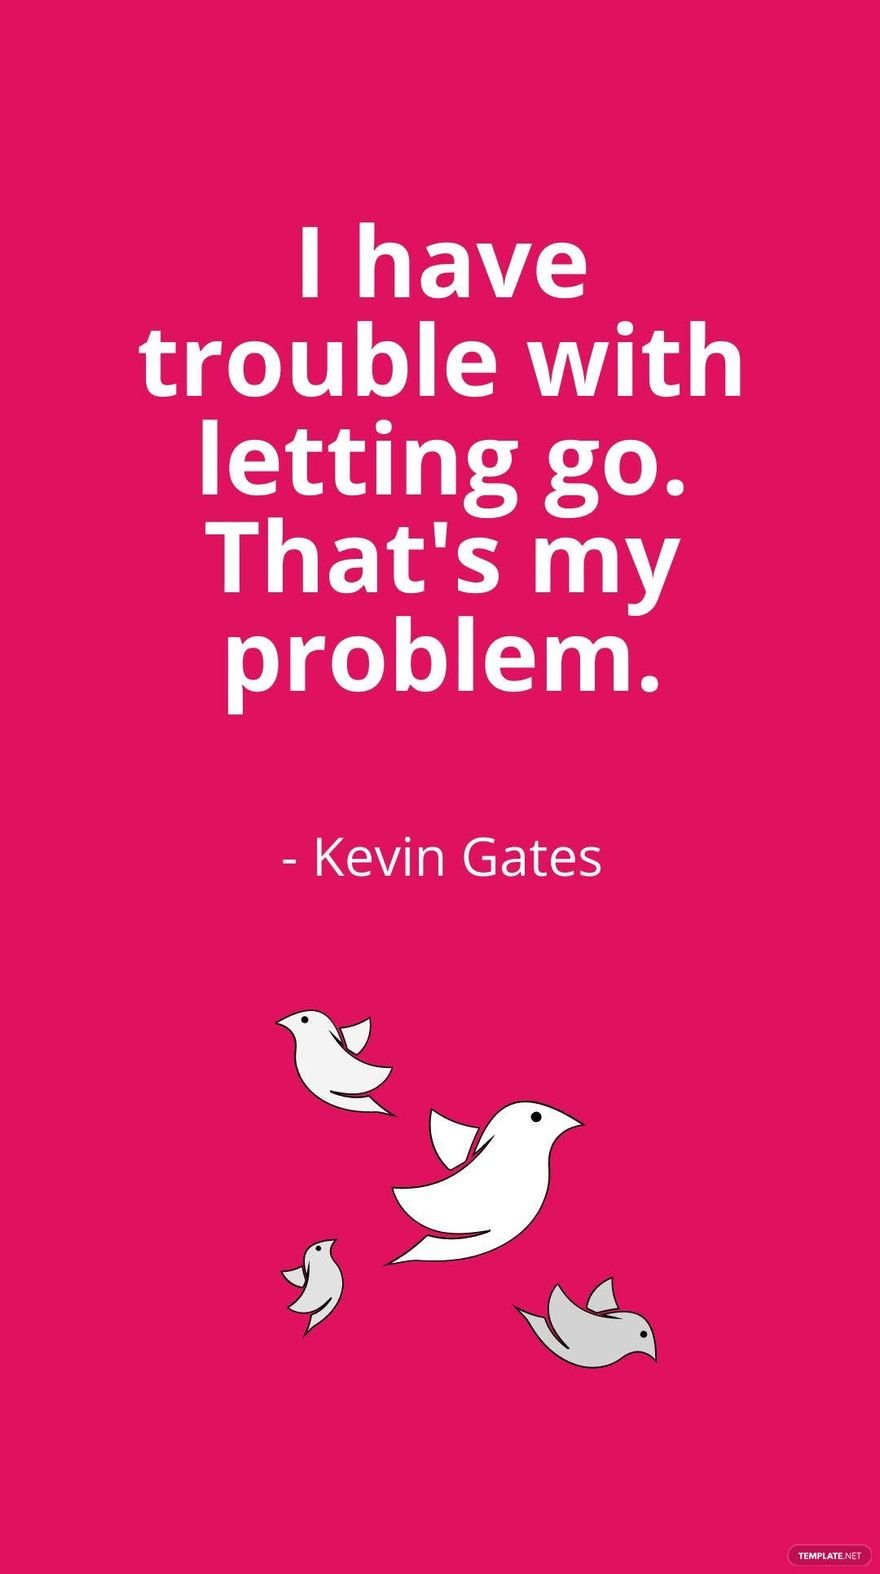 Kevin Gates - I have trouble with letting go. That's my problem.